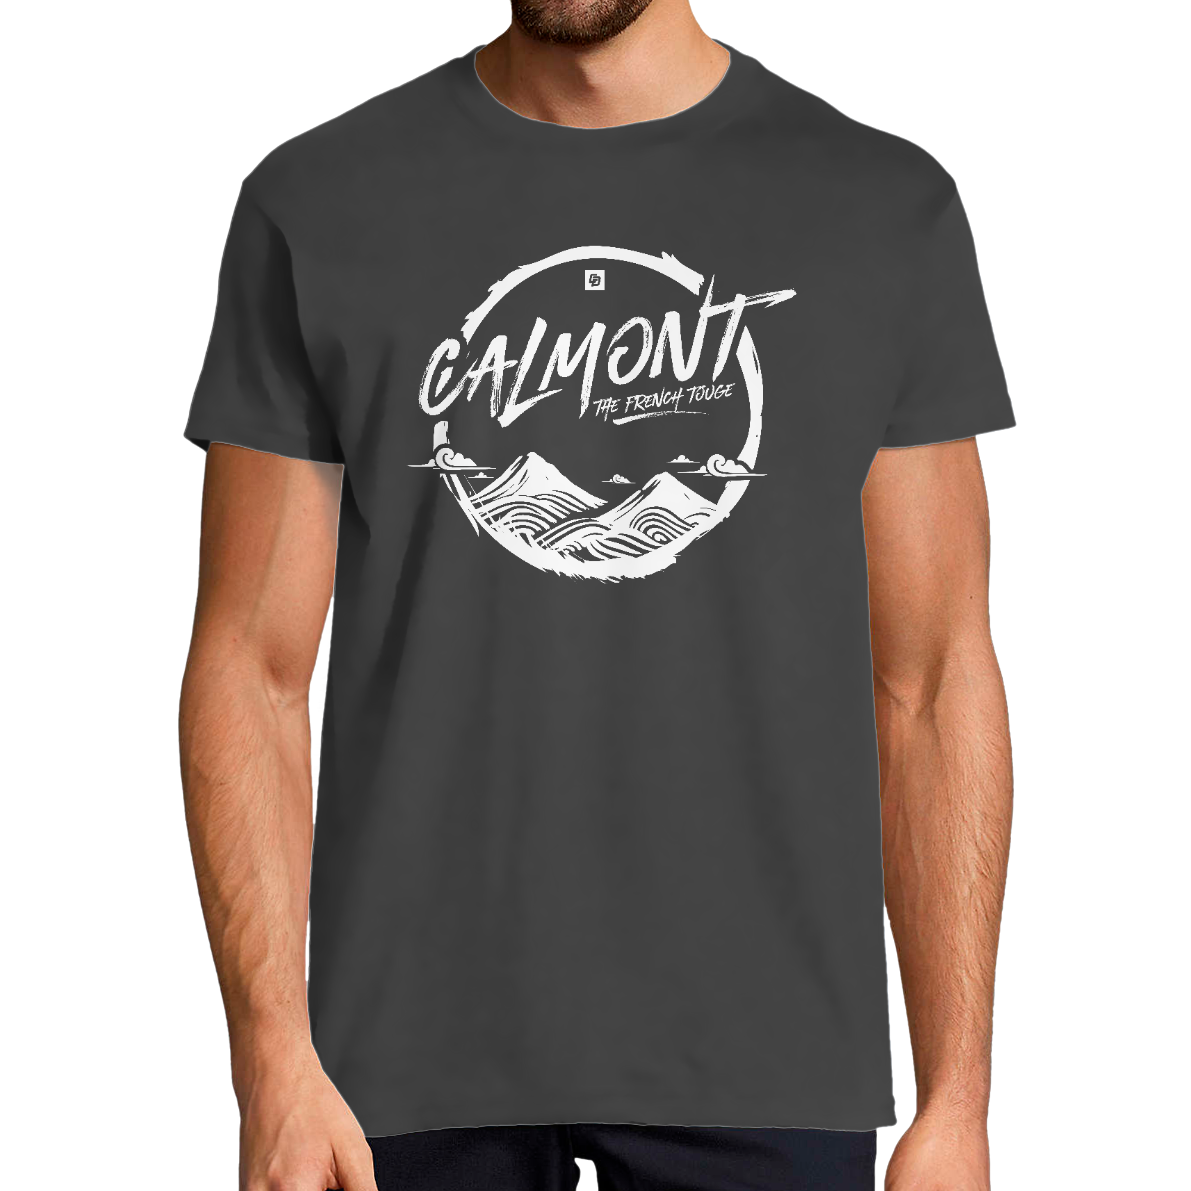 T-shirt Calmont "The French Touge"